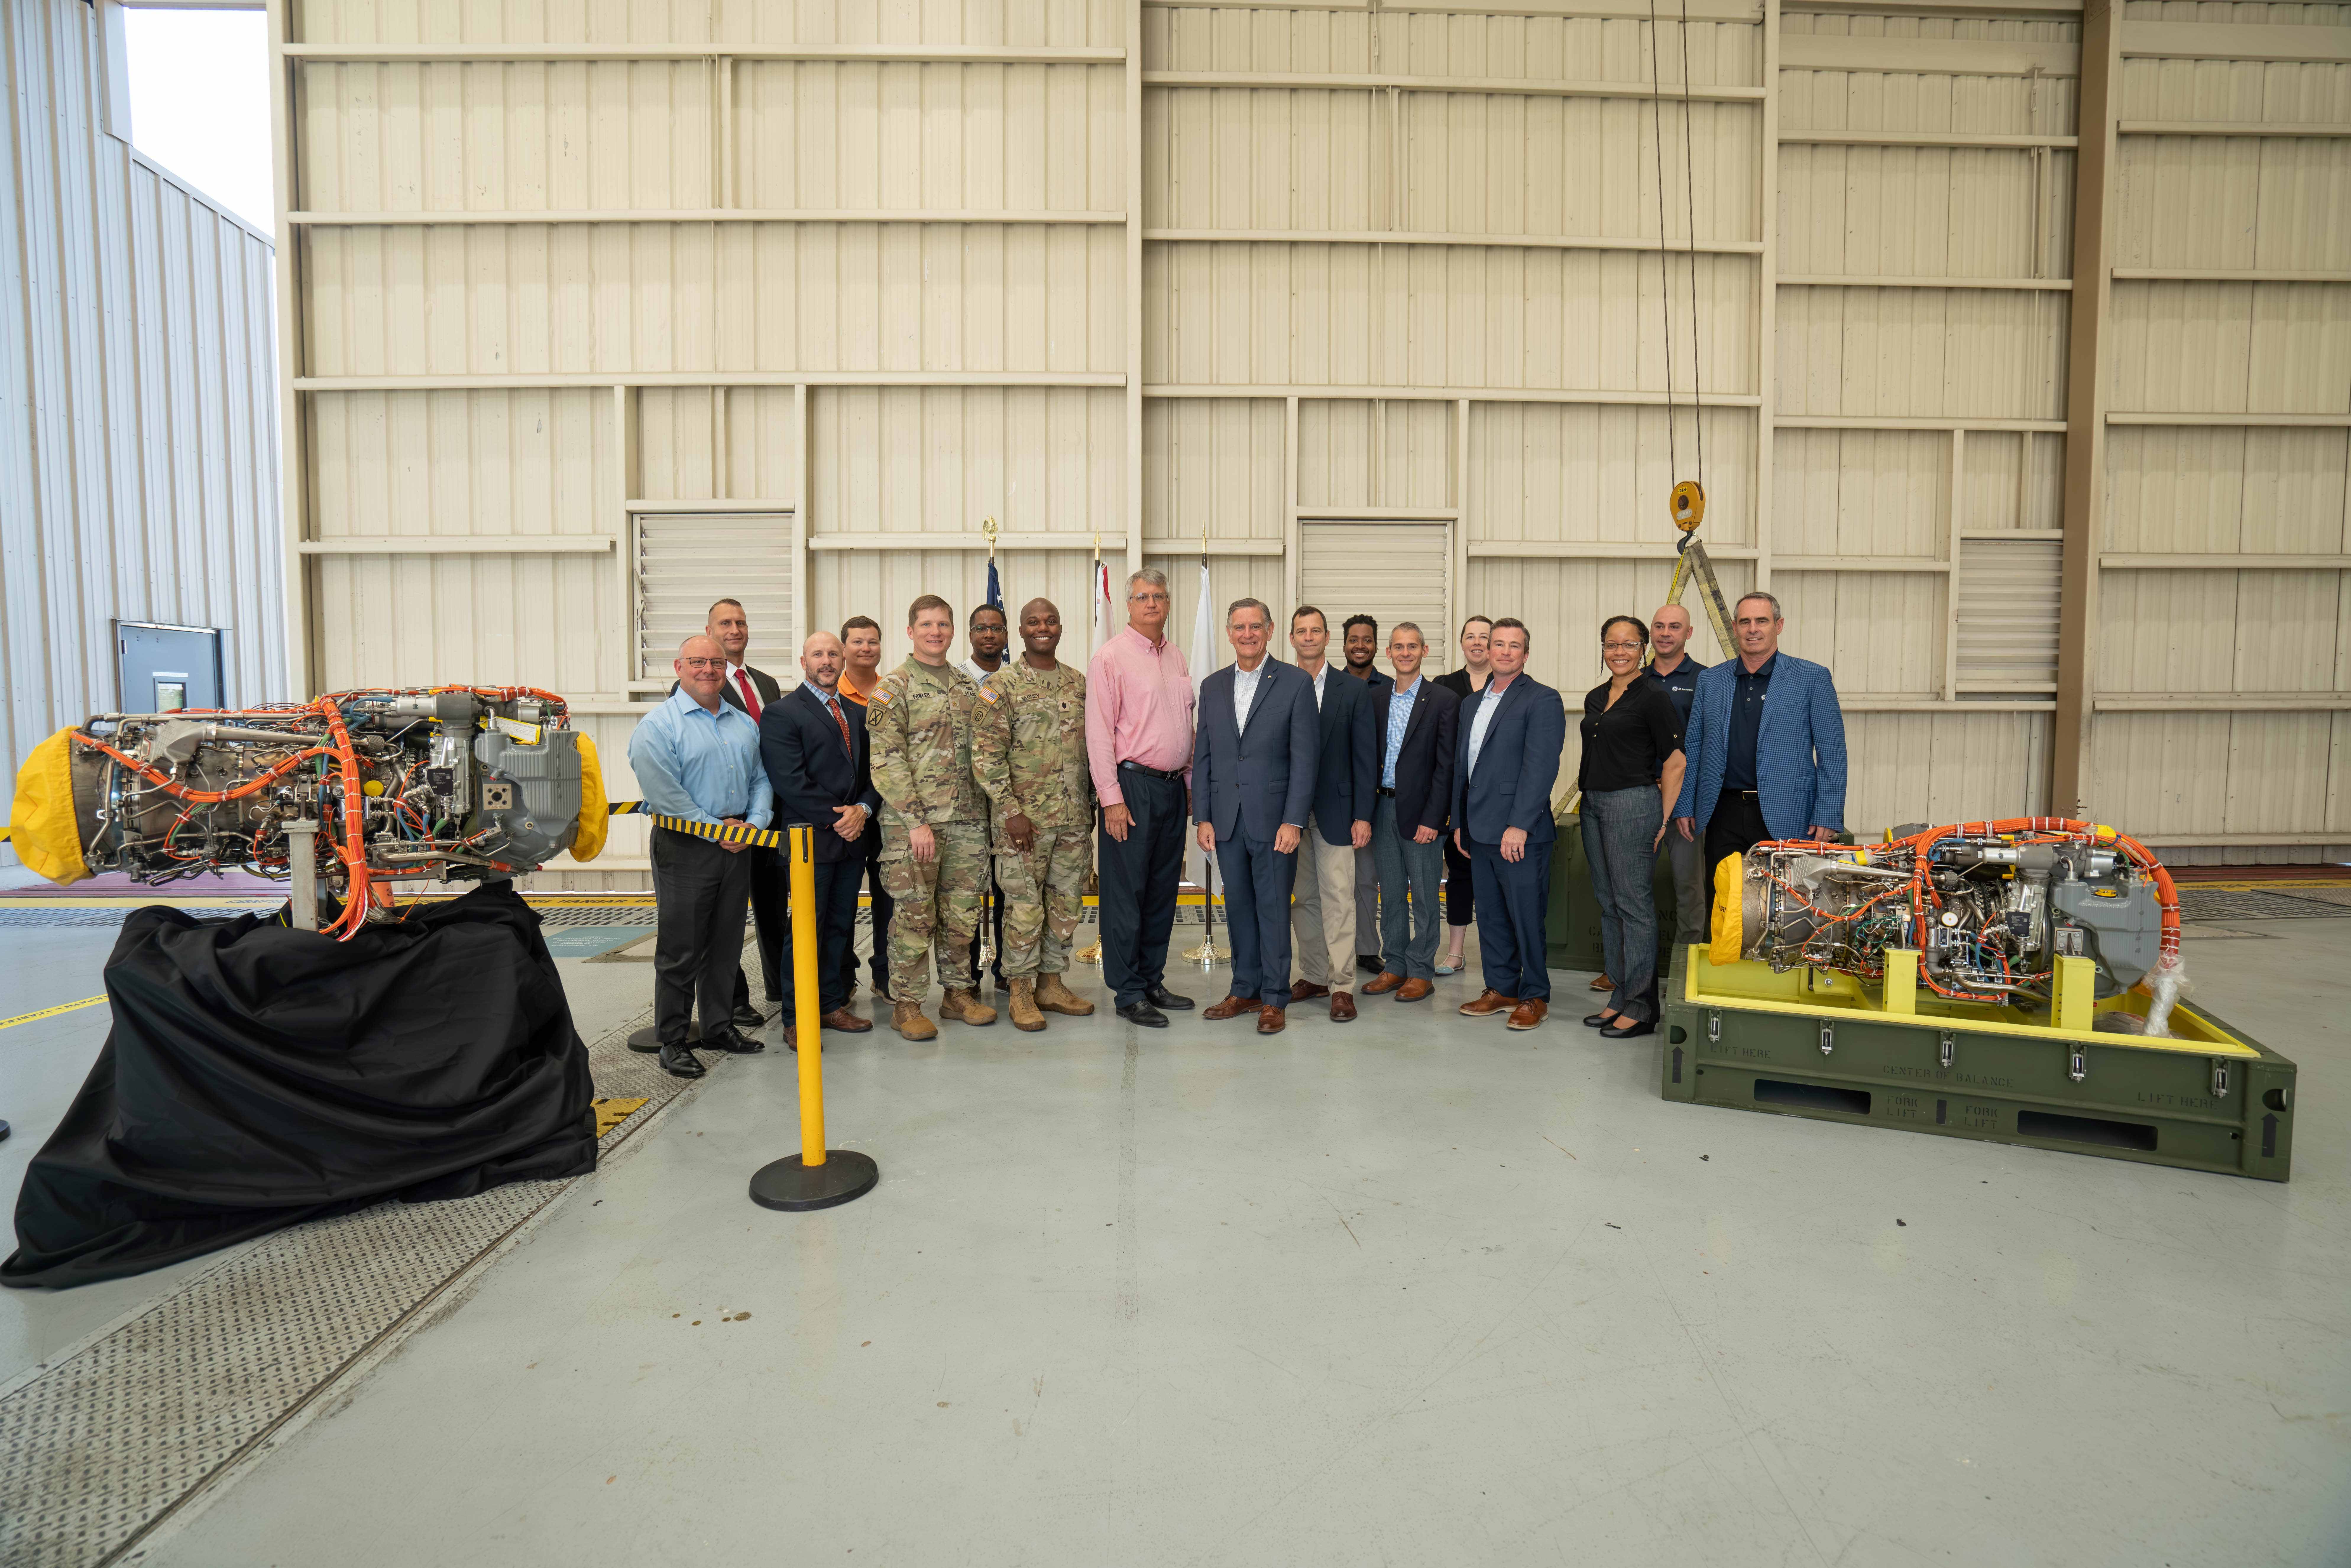 GE Aerospace T901 Engines Unboxed During Ceremony at Sikorsky's West Palm Beach Facility.